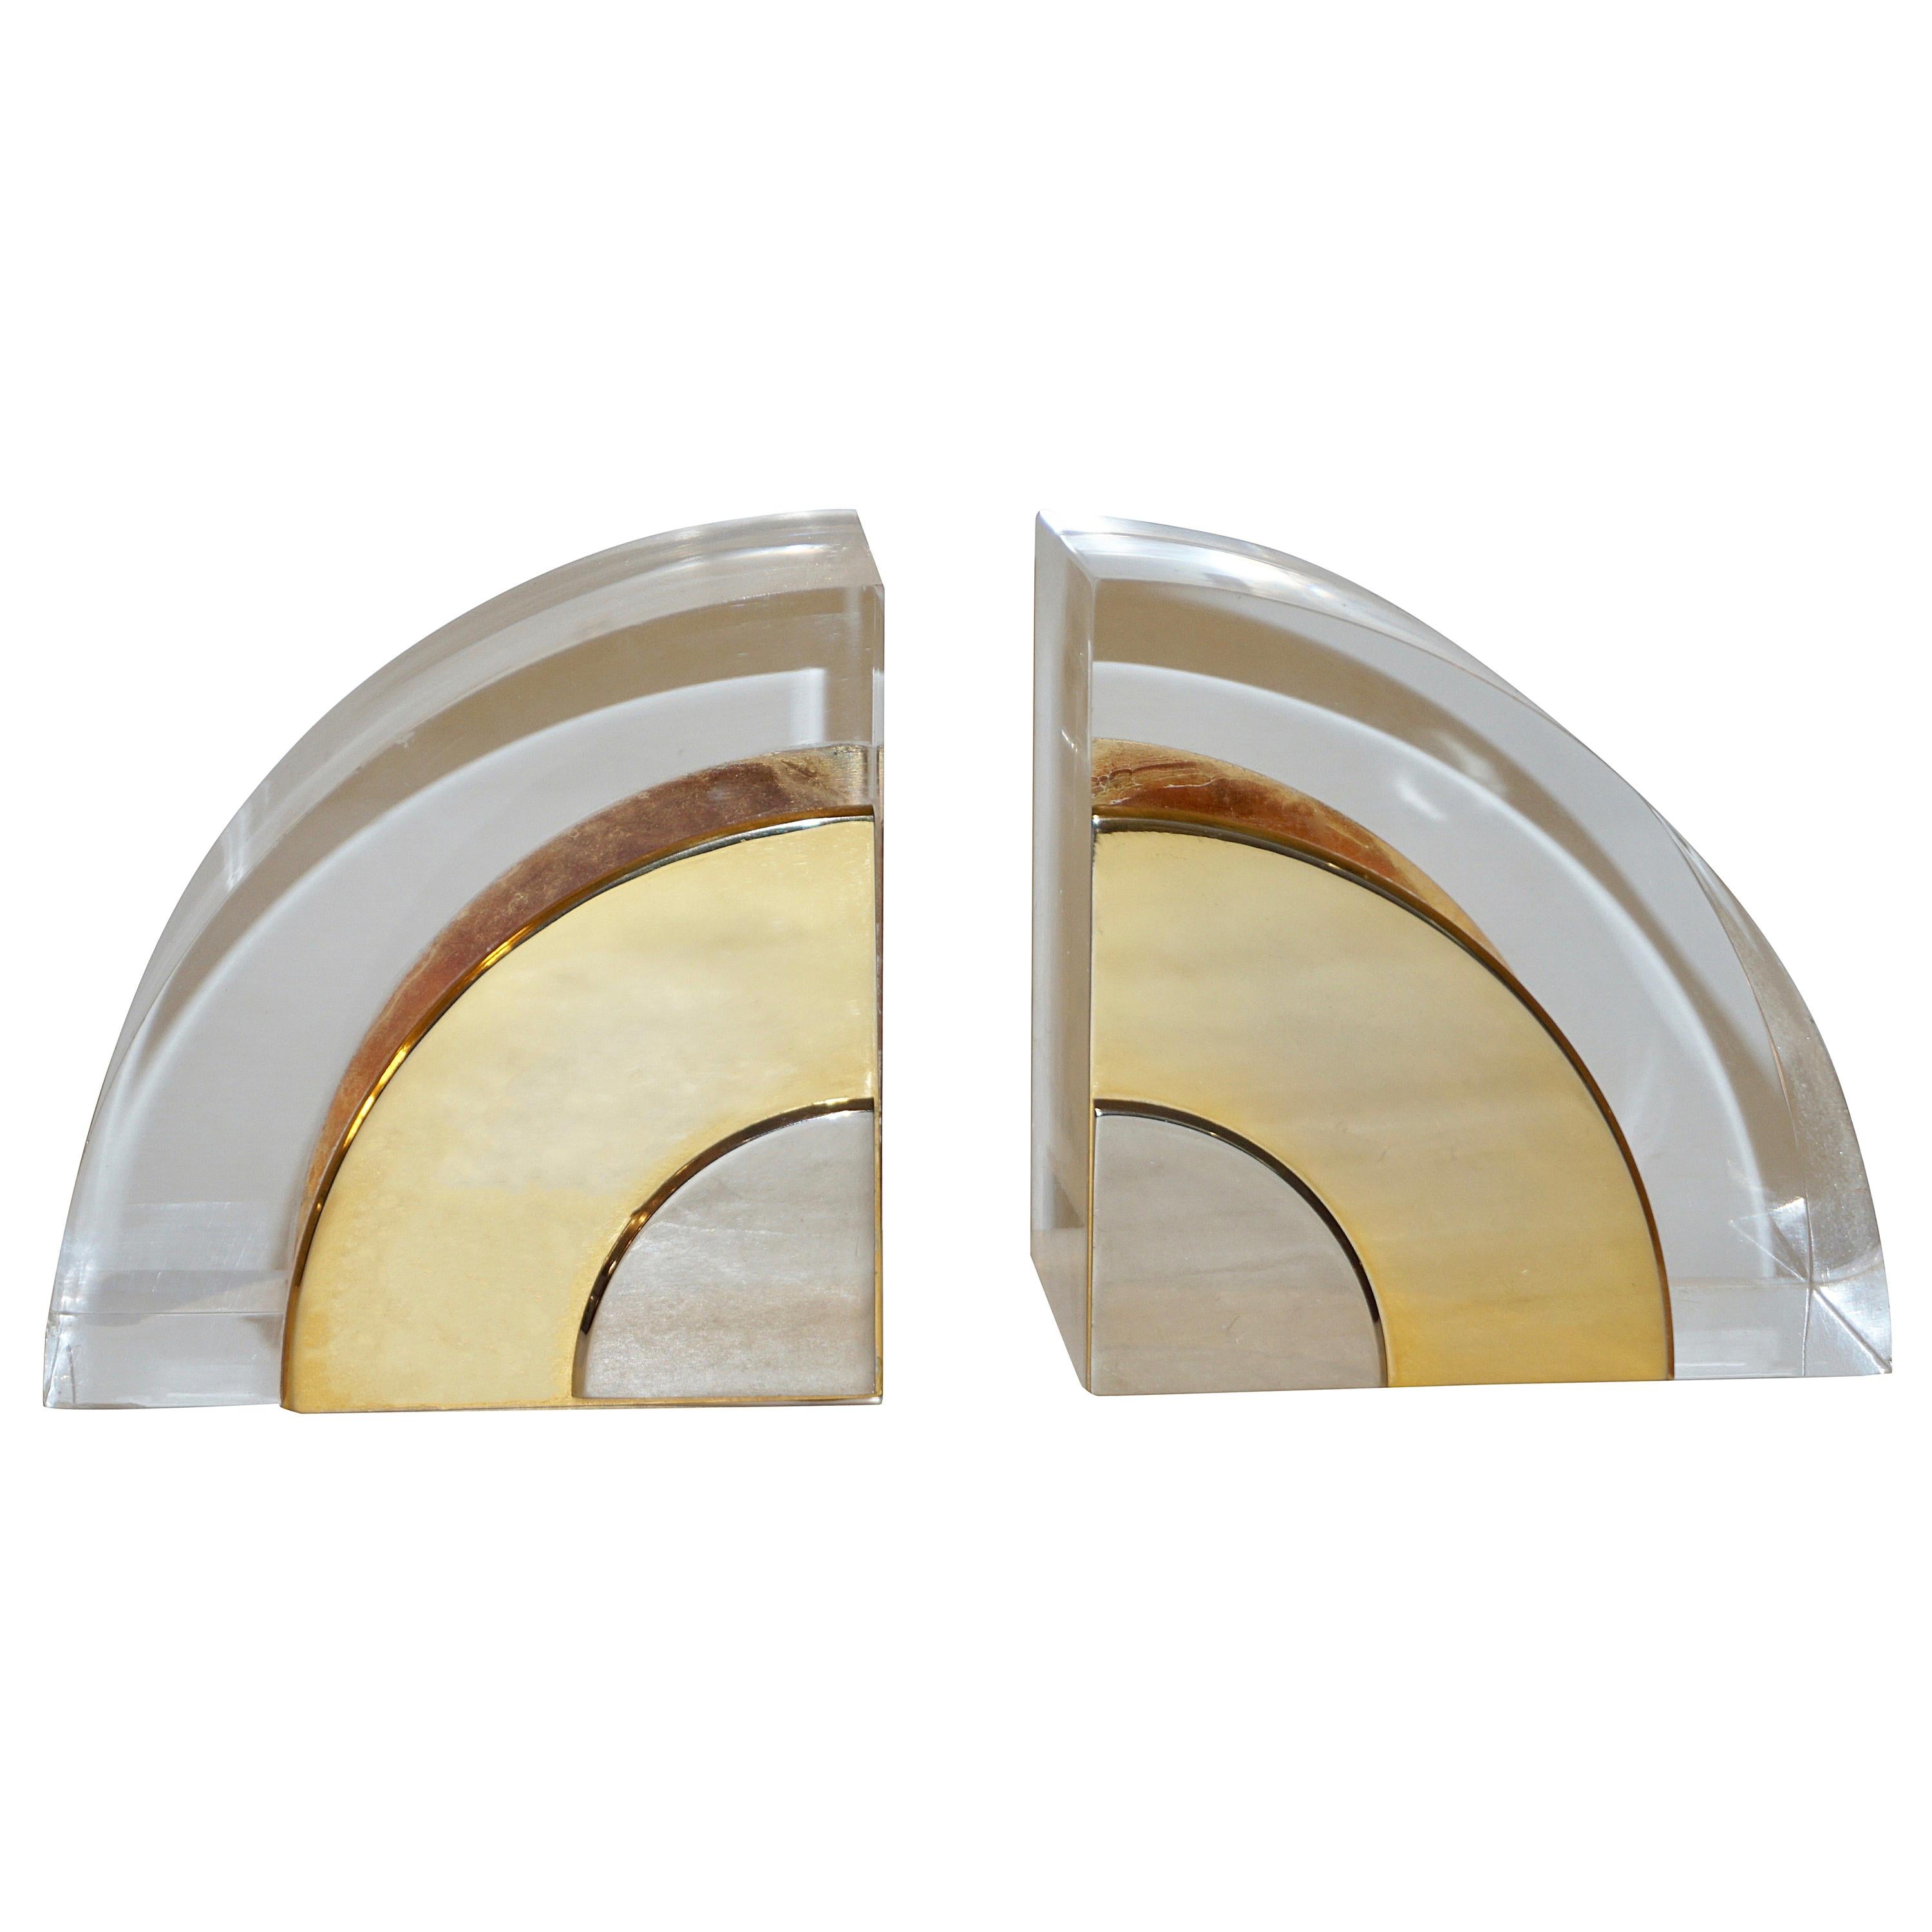 A pair of vintage bookends with Minimalist modern design. The organic body in Lucite presents very clean yet sensual curves with a quarter cylinder shape, adorned by two simple chrome color and brass arched decorations finely pegged in the